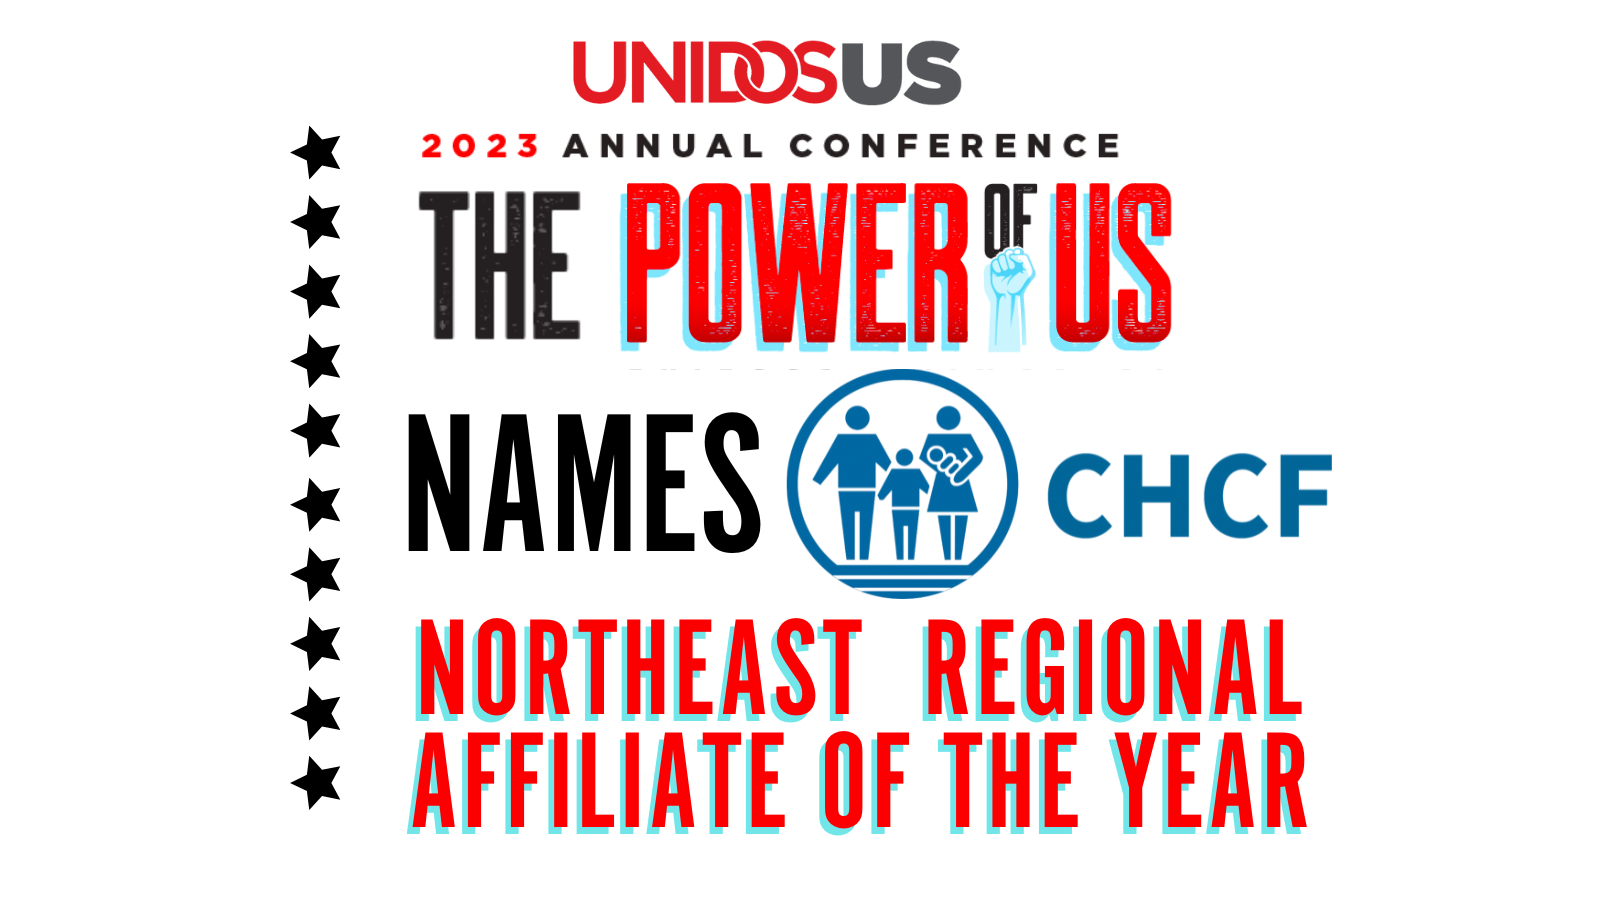 CHCF Takes the Stage as Northeast Regional Affiliate of the Year at UNIDOS’s 2023 Conference